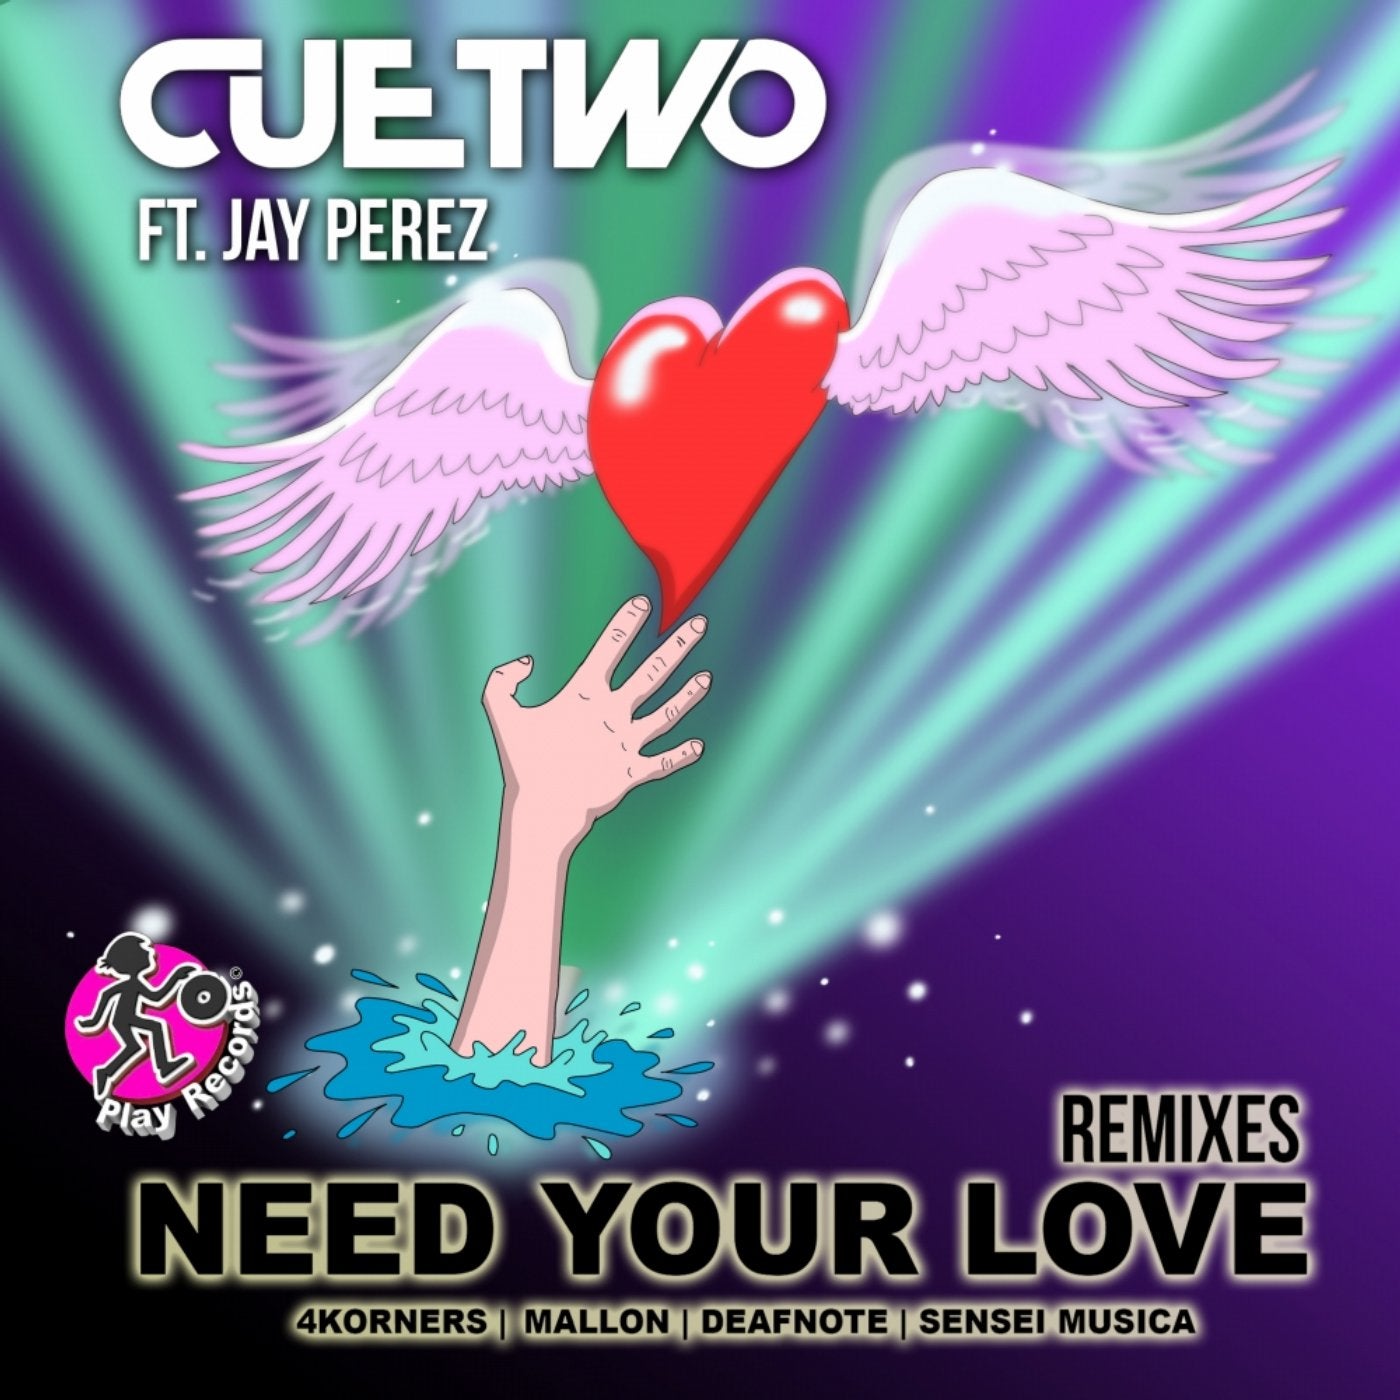 Need Your Love (The Remixes)